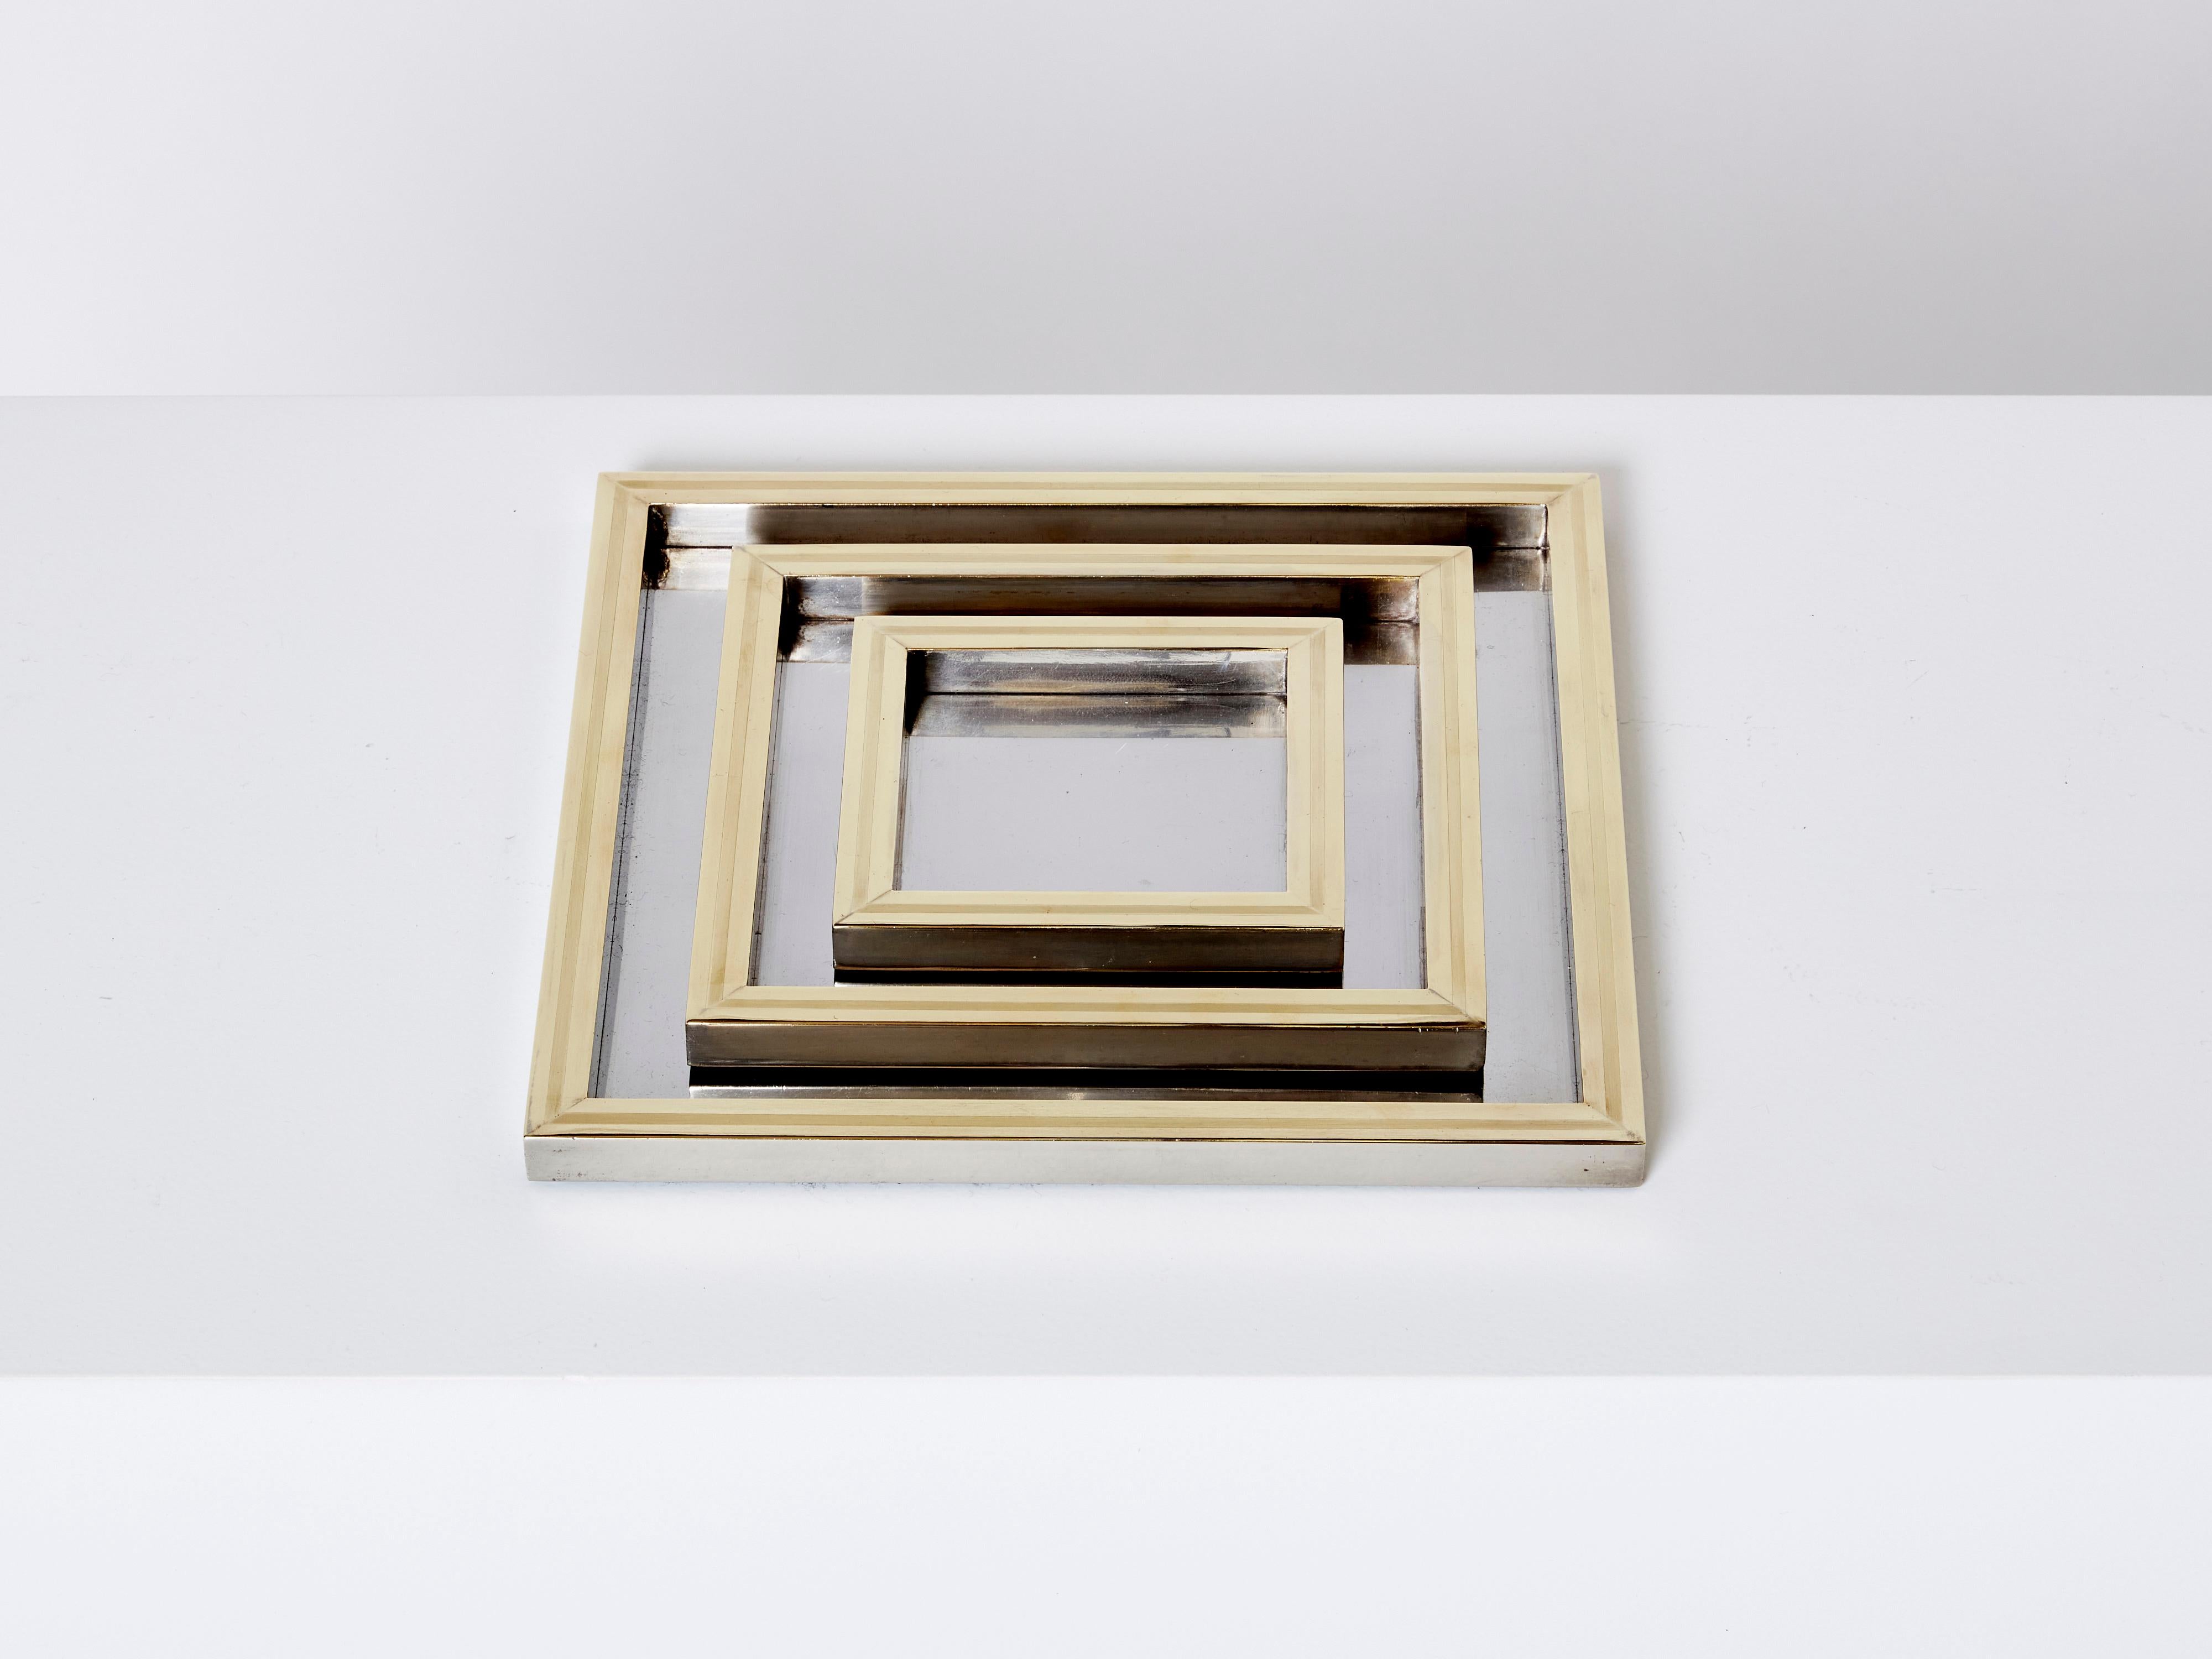 Beautiful Willy Rizzo set of three nesting trays in polished stainless steel and brass, signed, from the 1970s. The graduated measurements are 5.15 inches then 7.9 inches and 10.65 inches. Handcrafted in Italy, with beautiful brass edges, these are